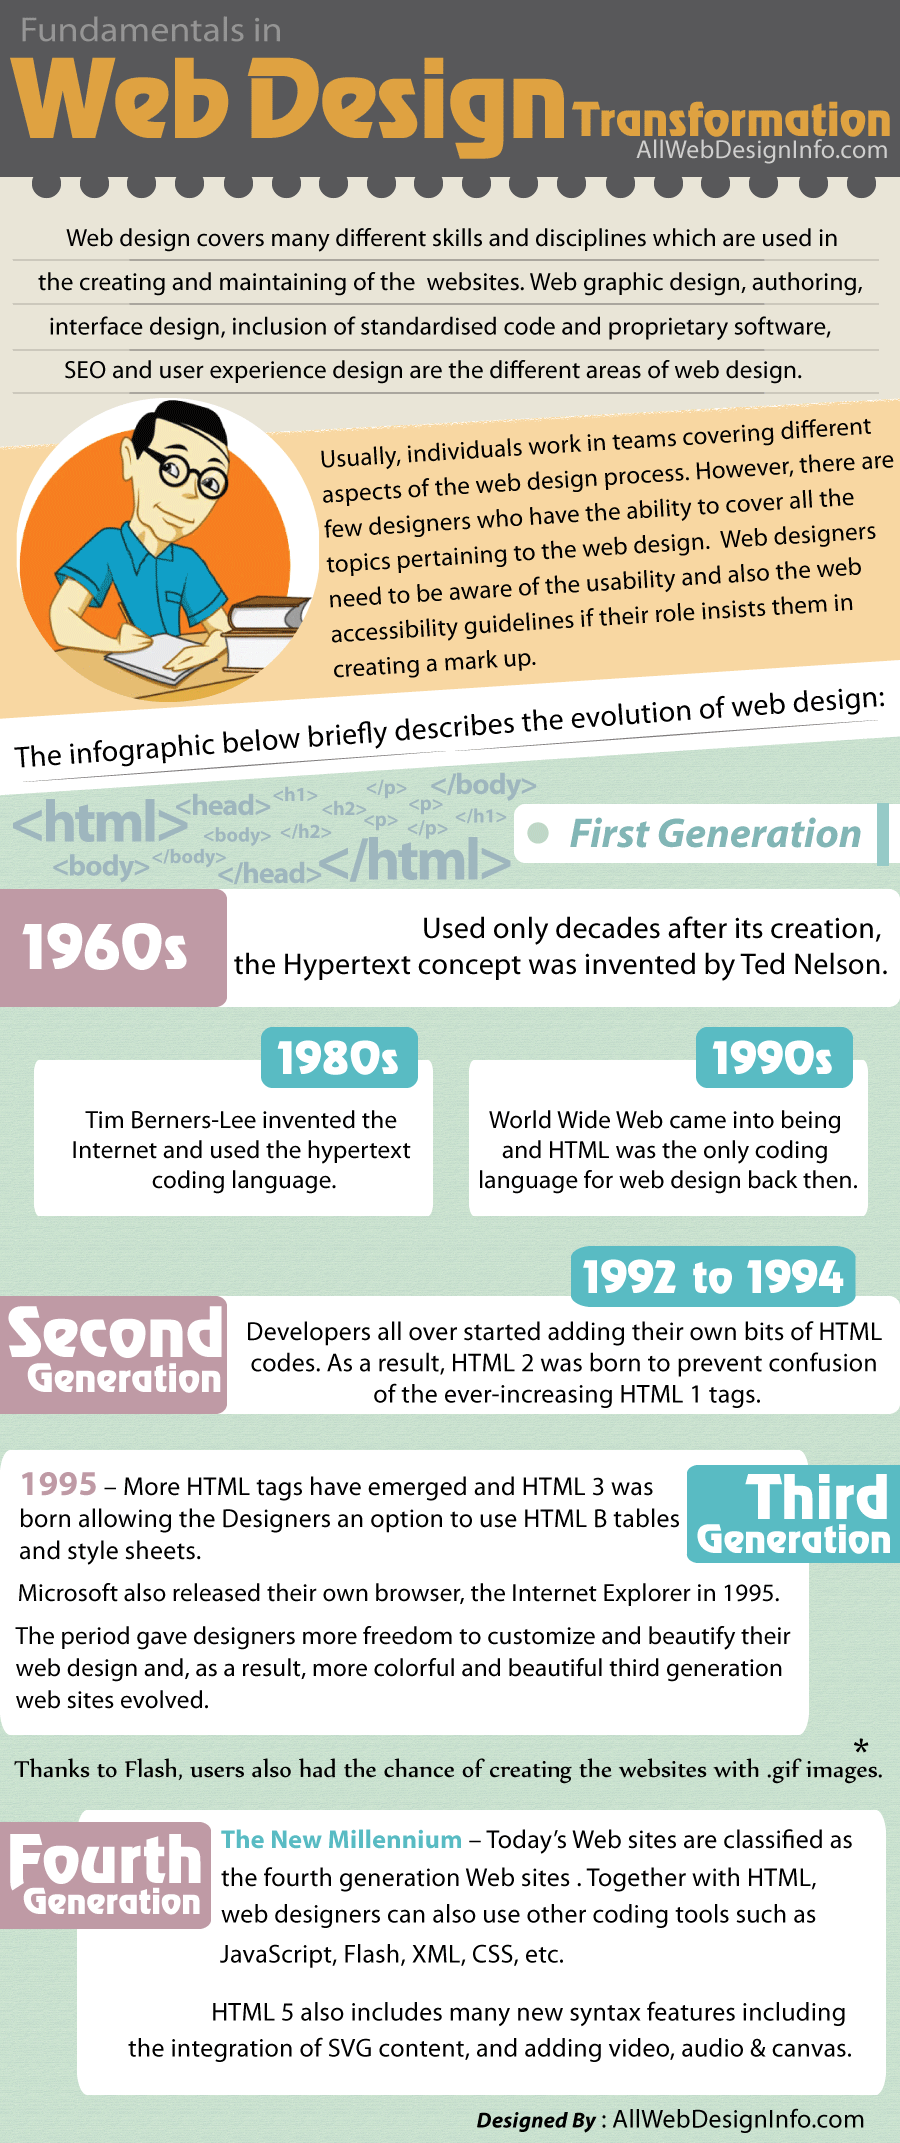 Web Design History & Transformation Through The Years [Infographic]